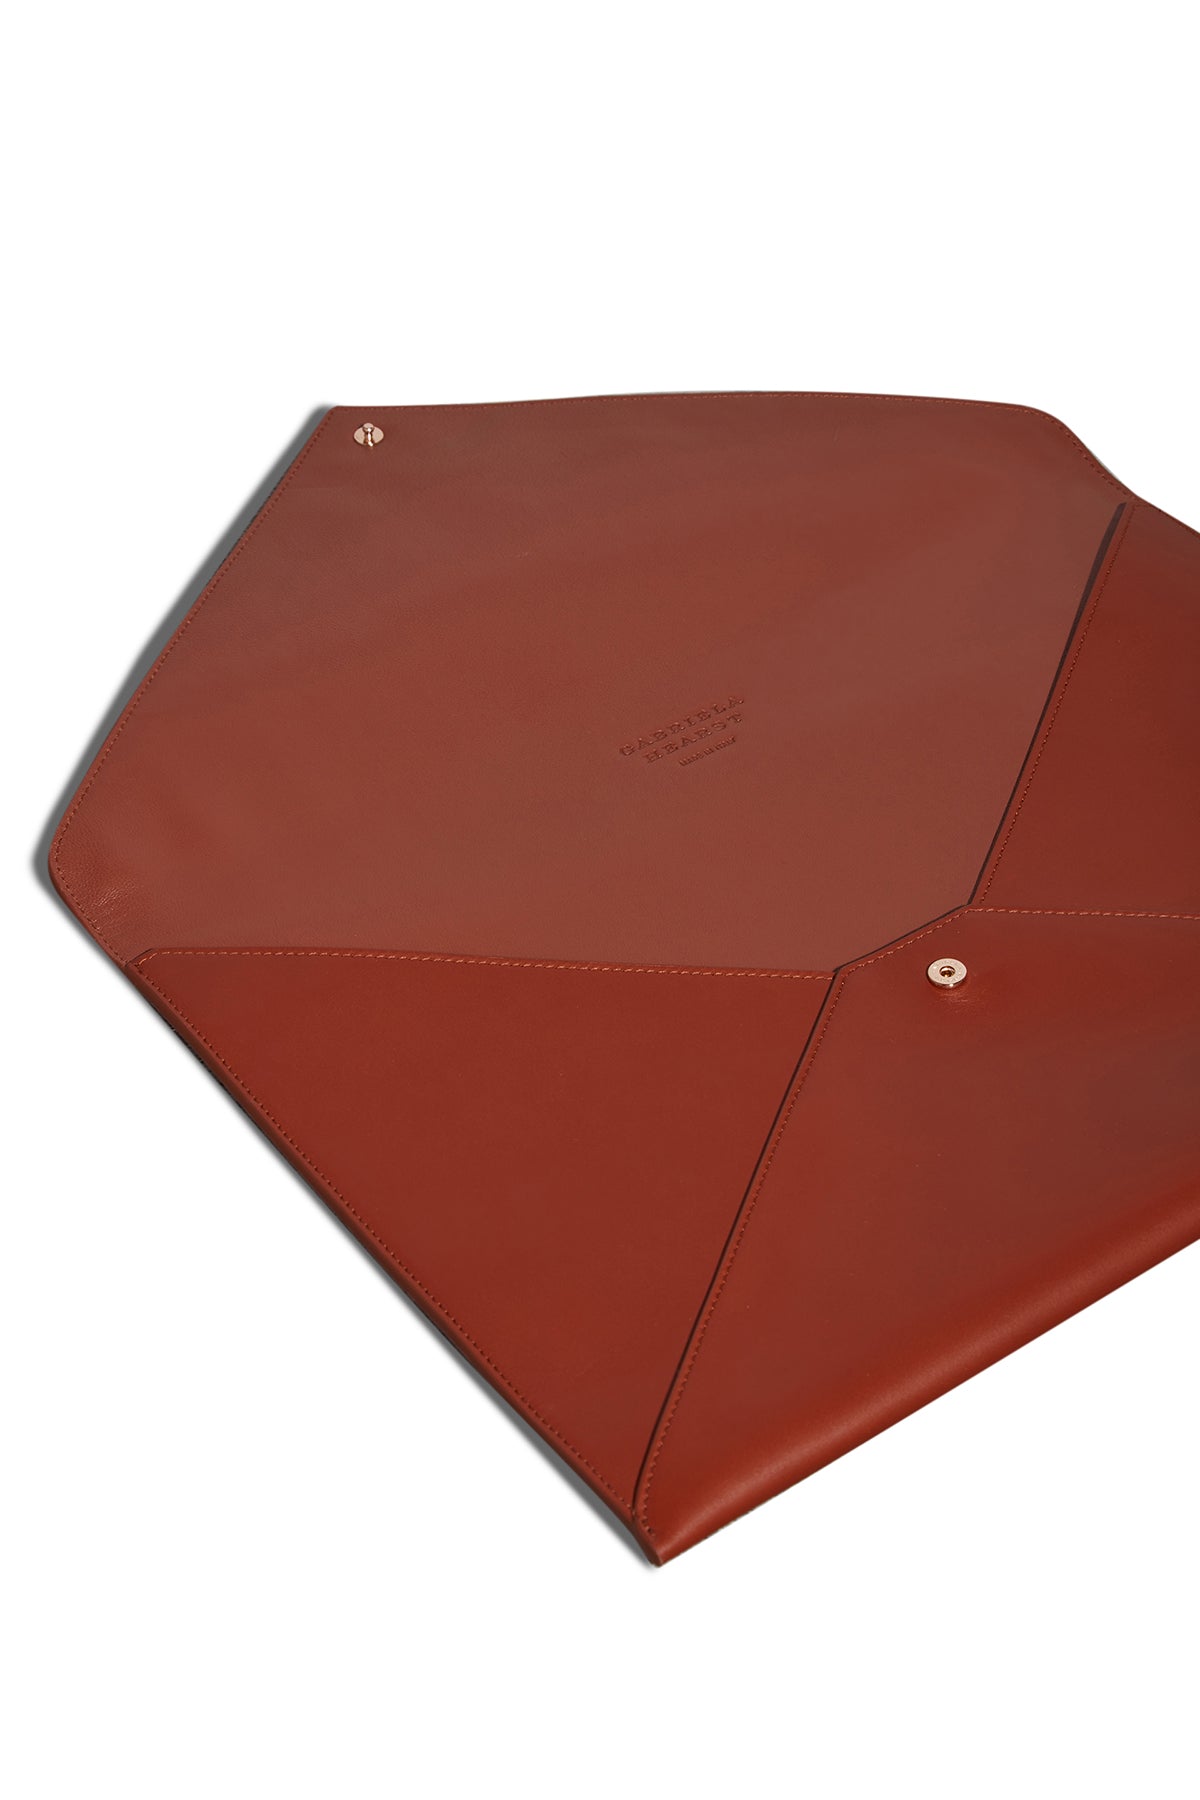 Large Envelope in Cognac Leather